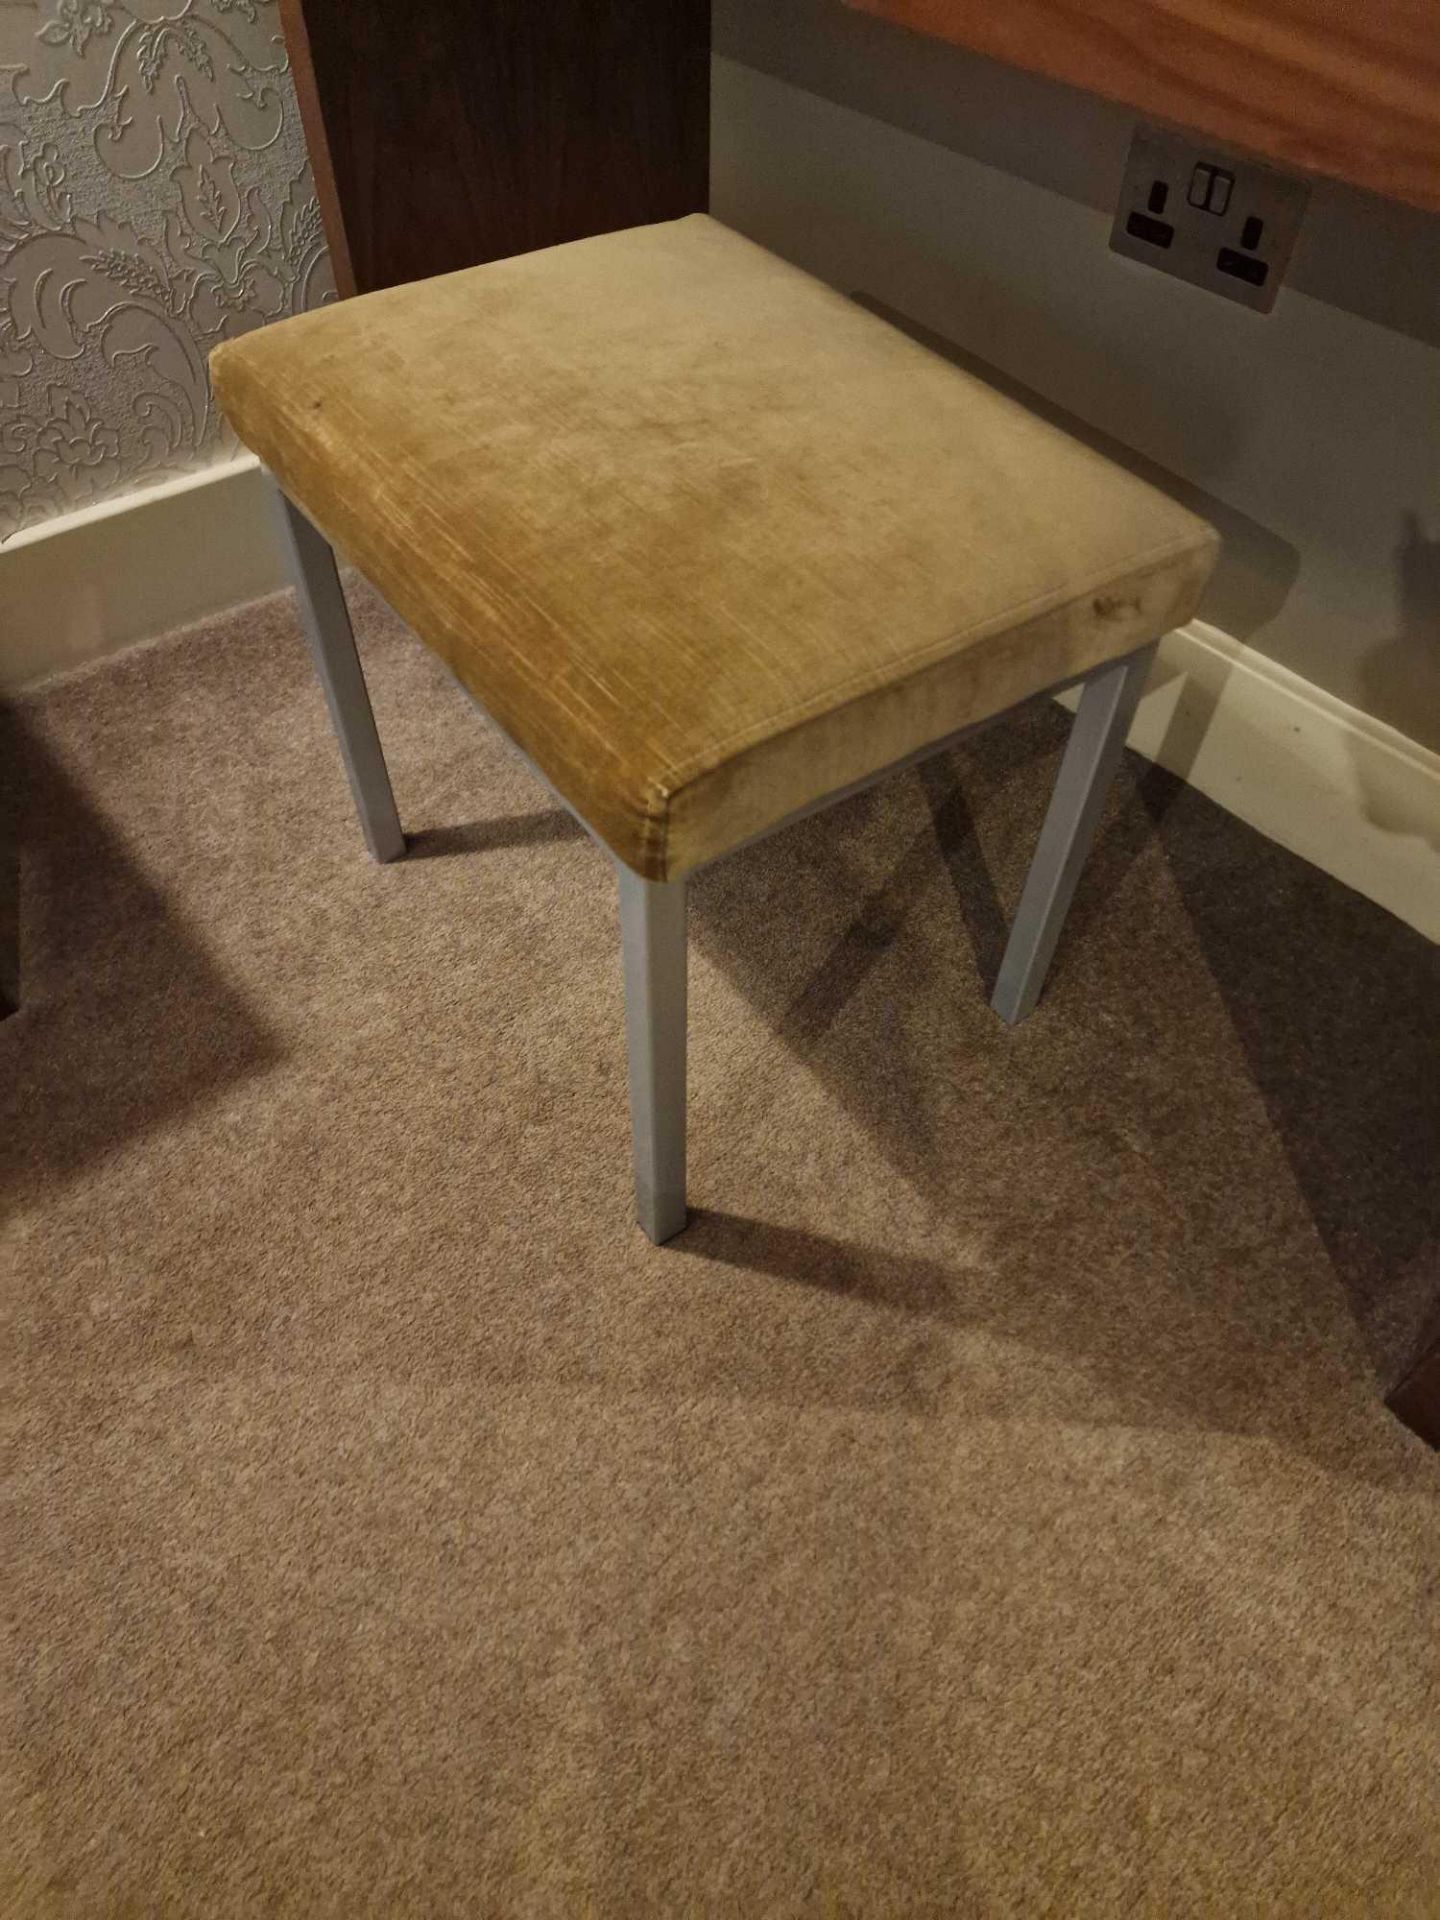 Metal framed upholstered seat pad stool 48 x 36 x 41cm ( Location : 108)